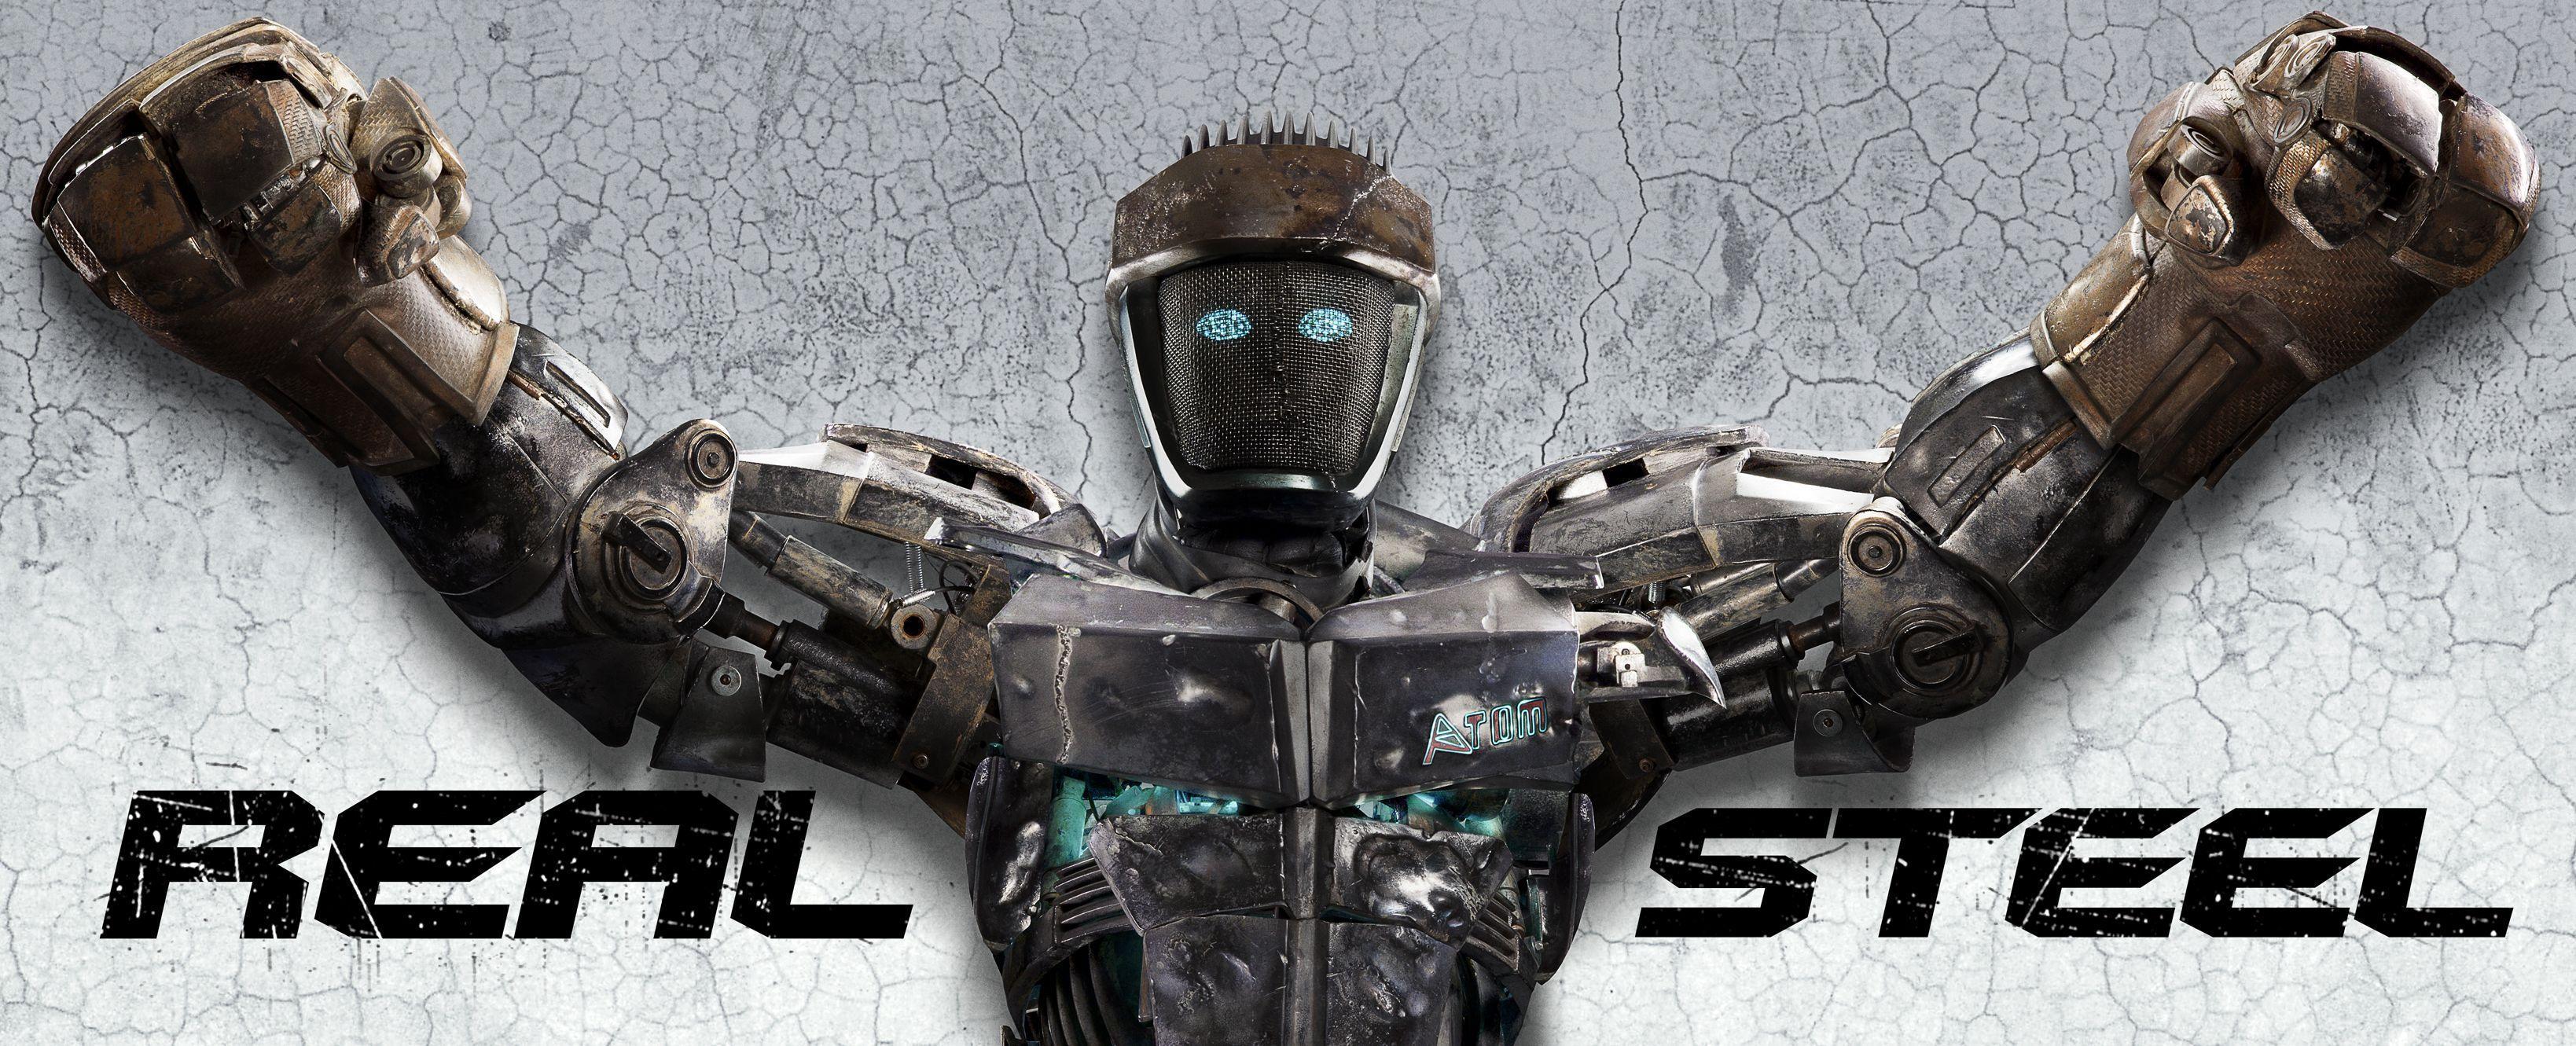 image about Acero Puro (Real Steel) <3 <3